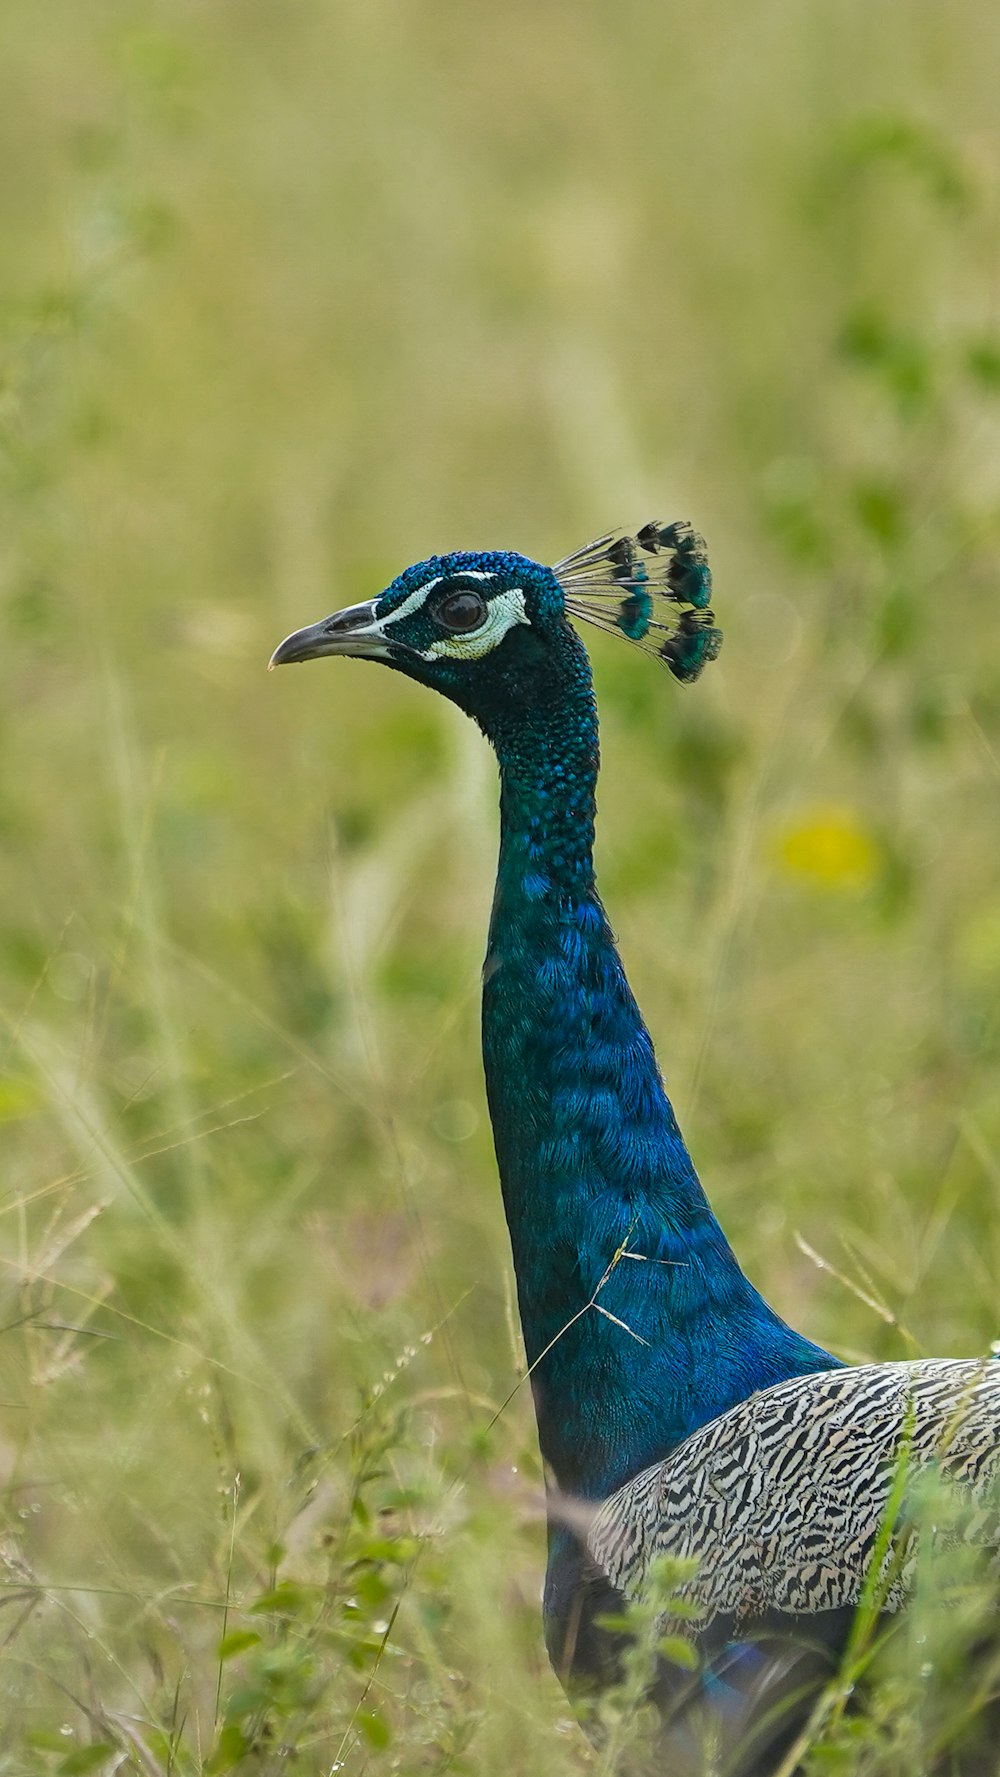 a peacock standing in a field of tall grass